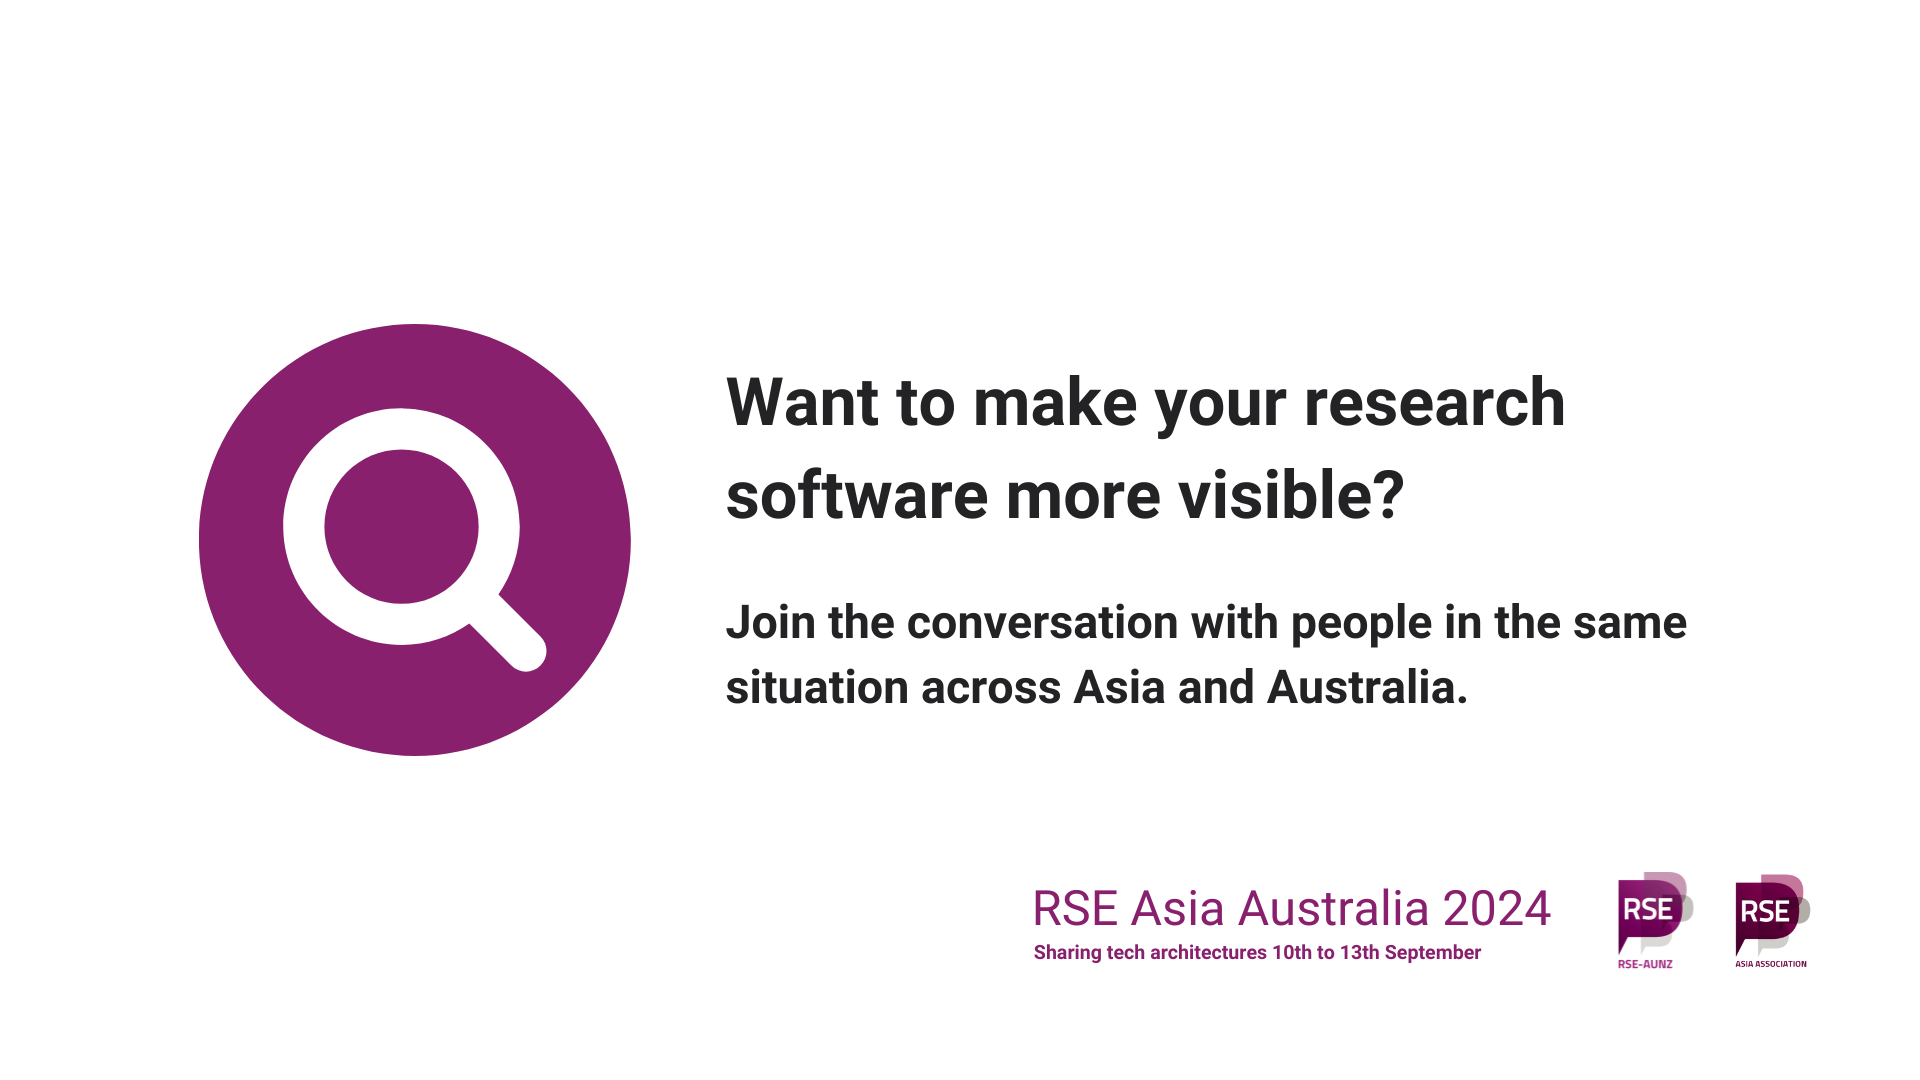 Magnifying glass in purple circle. Want to make your research software more visible? Join the conversation with people in the same situation across Asia and Australia. RSE Asia Australia 2024. Sharing tech architectures. 10th to 13th September. Logos of RSE AUNZ and RSE Asia.